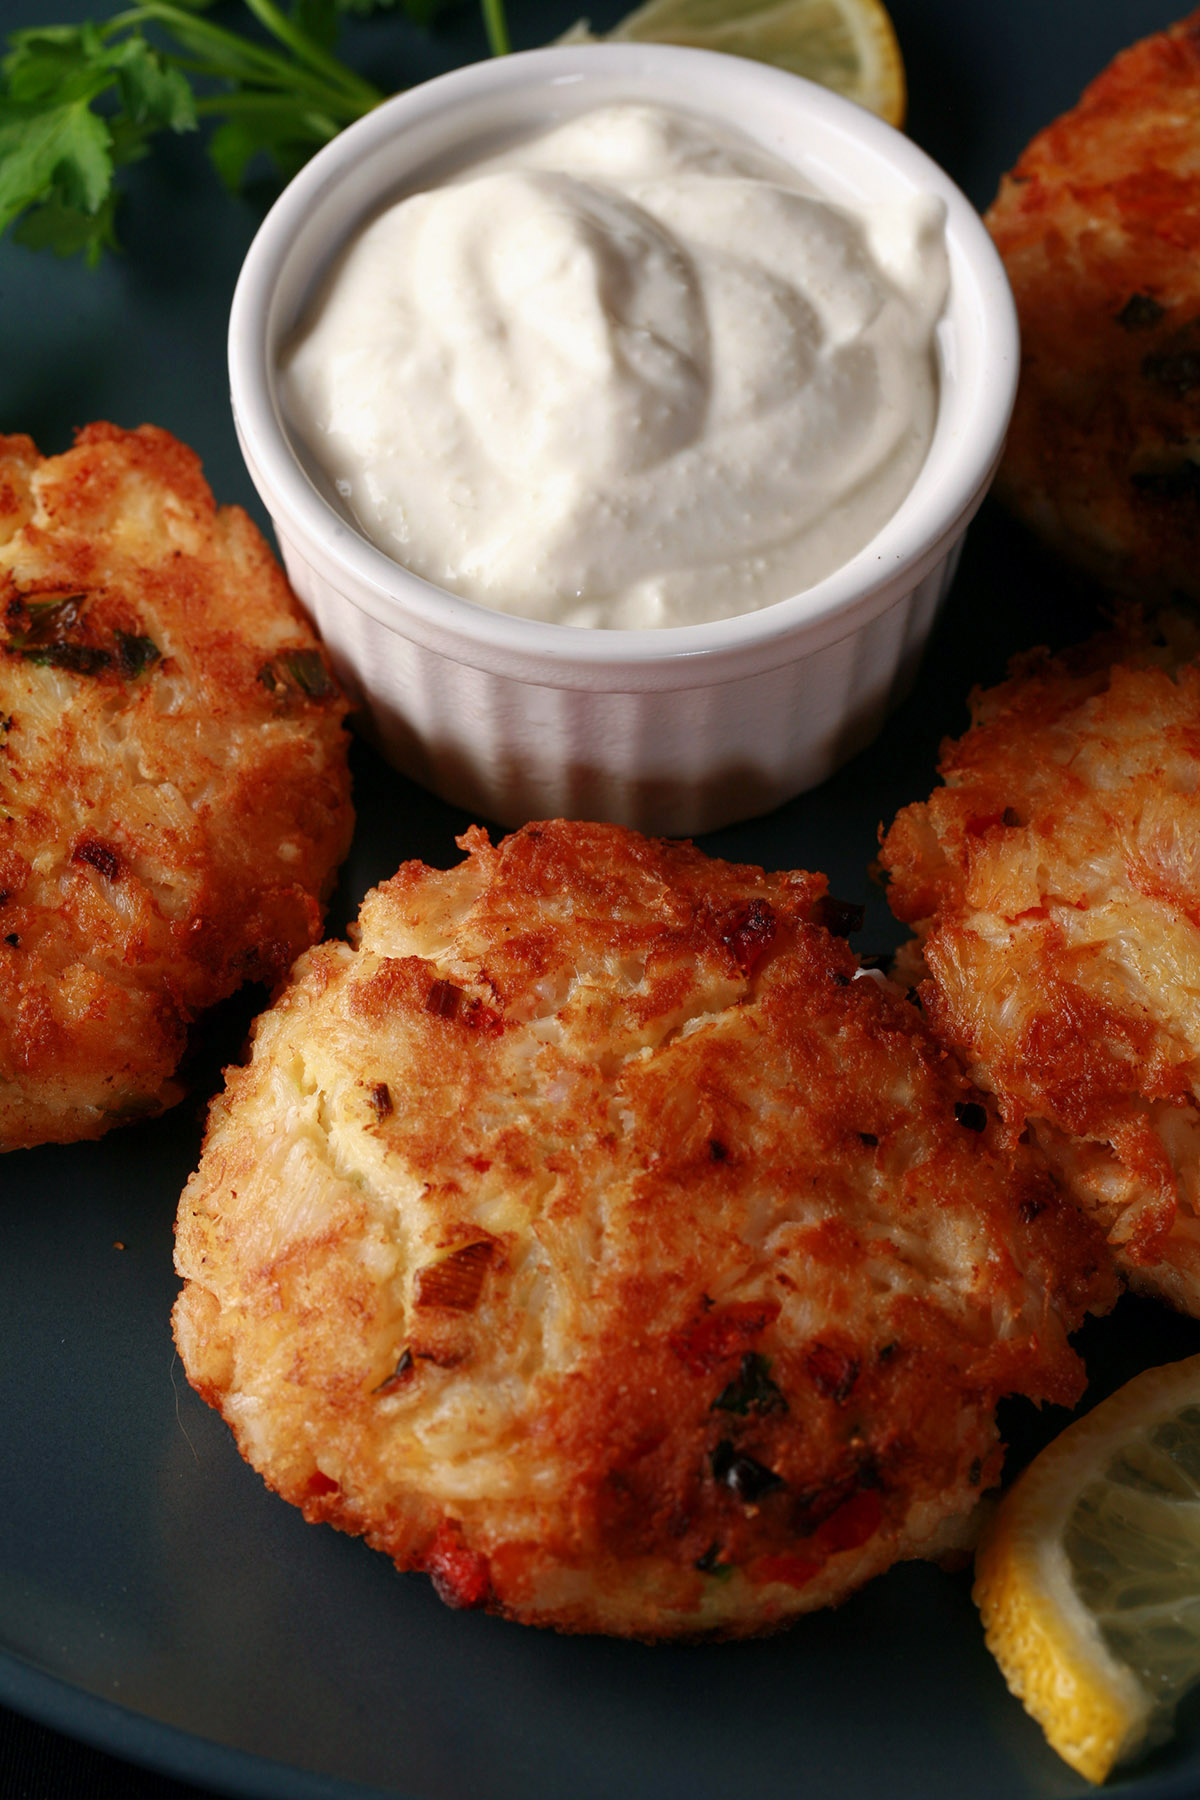 A plate of fried gluten free low carb crab cakes with a small bowl of horseradish sauce.